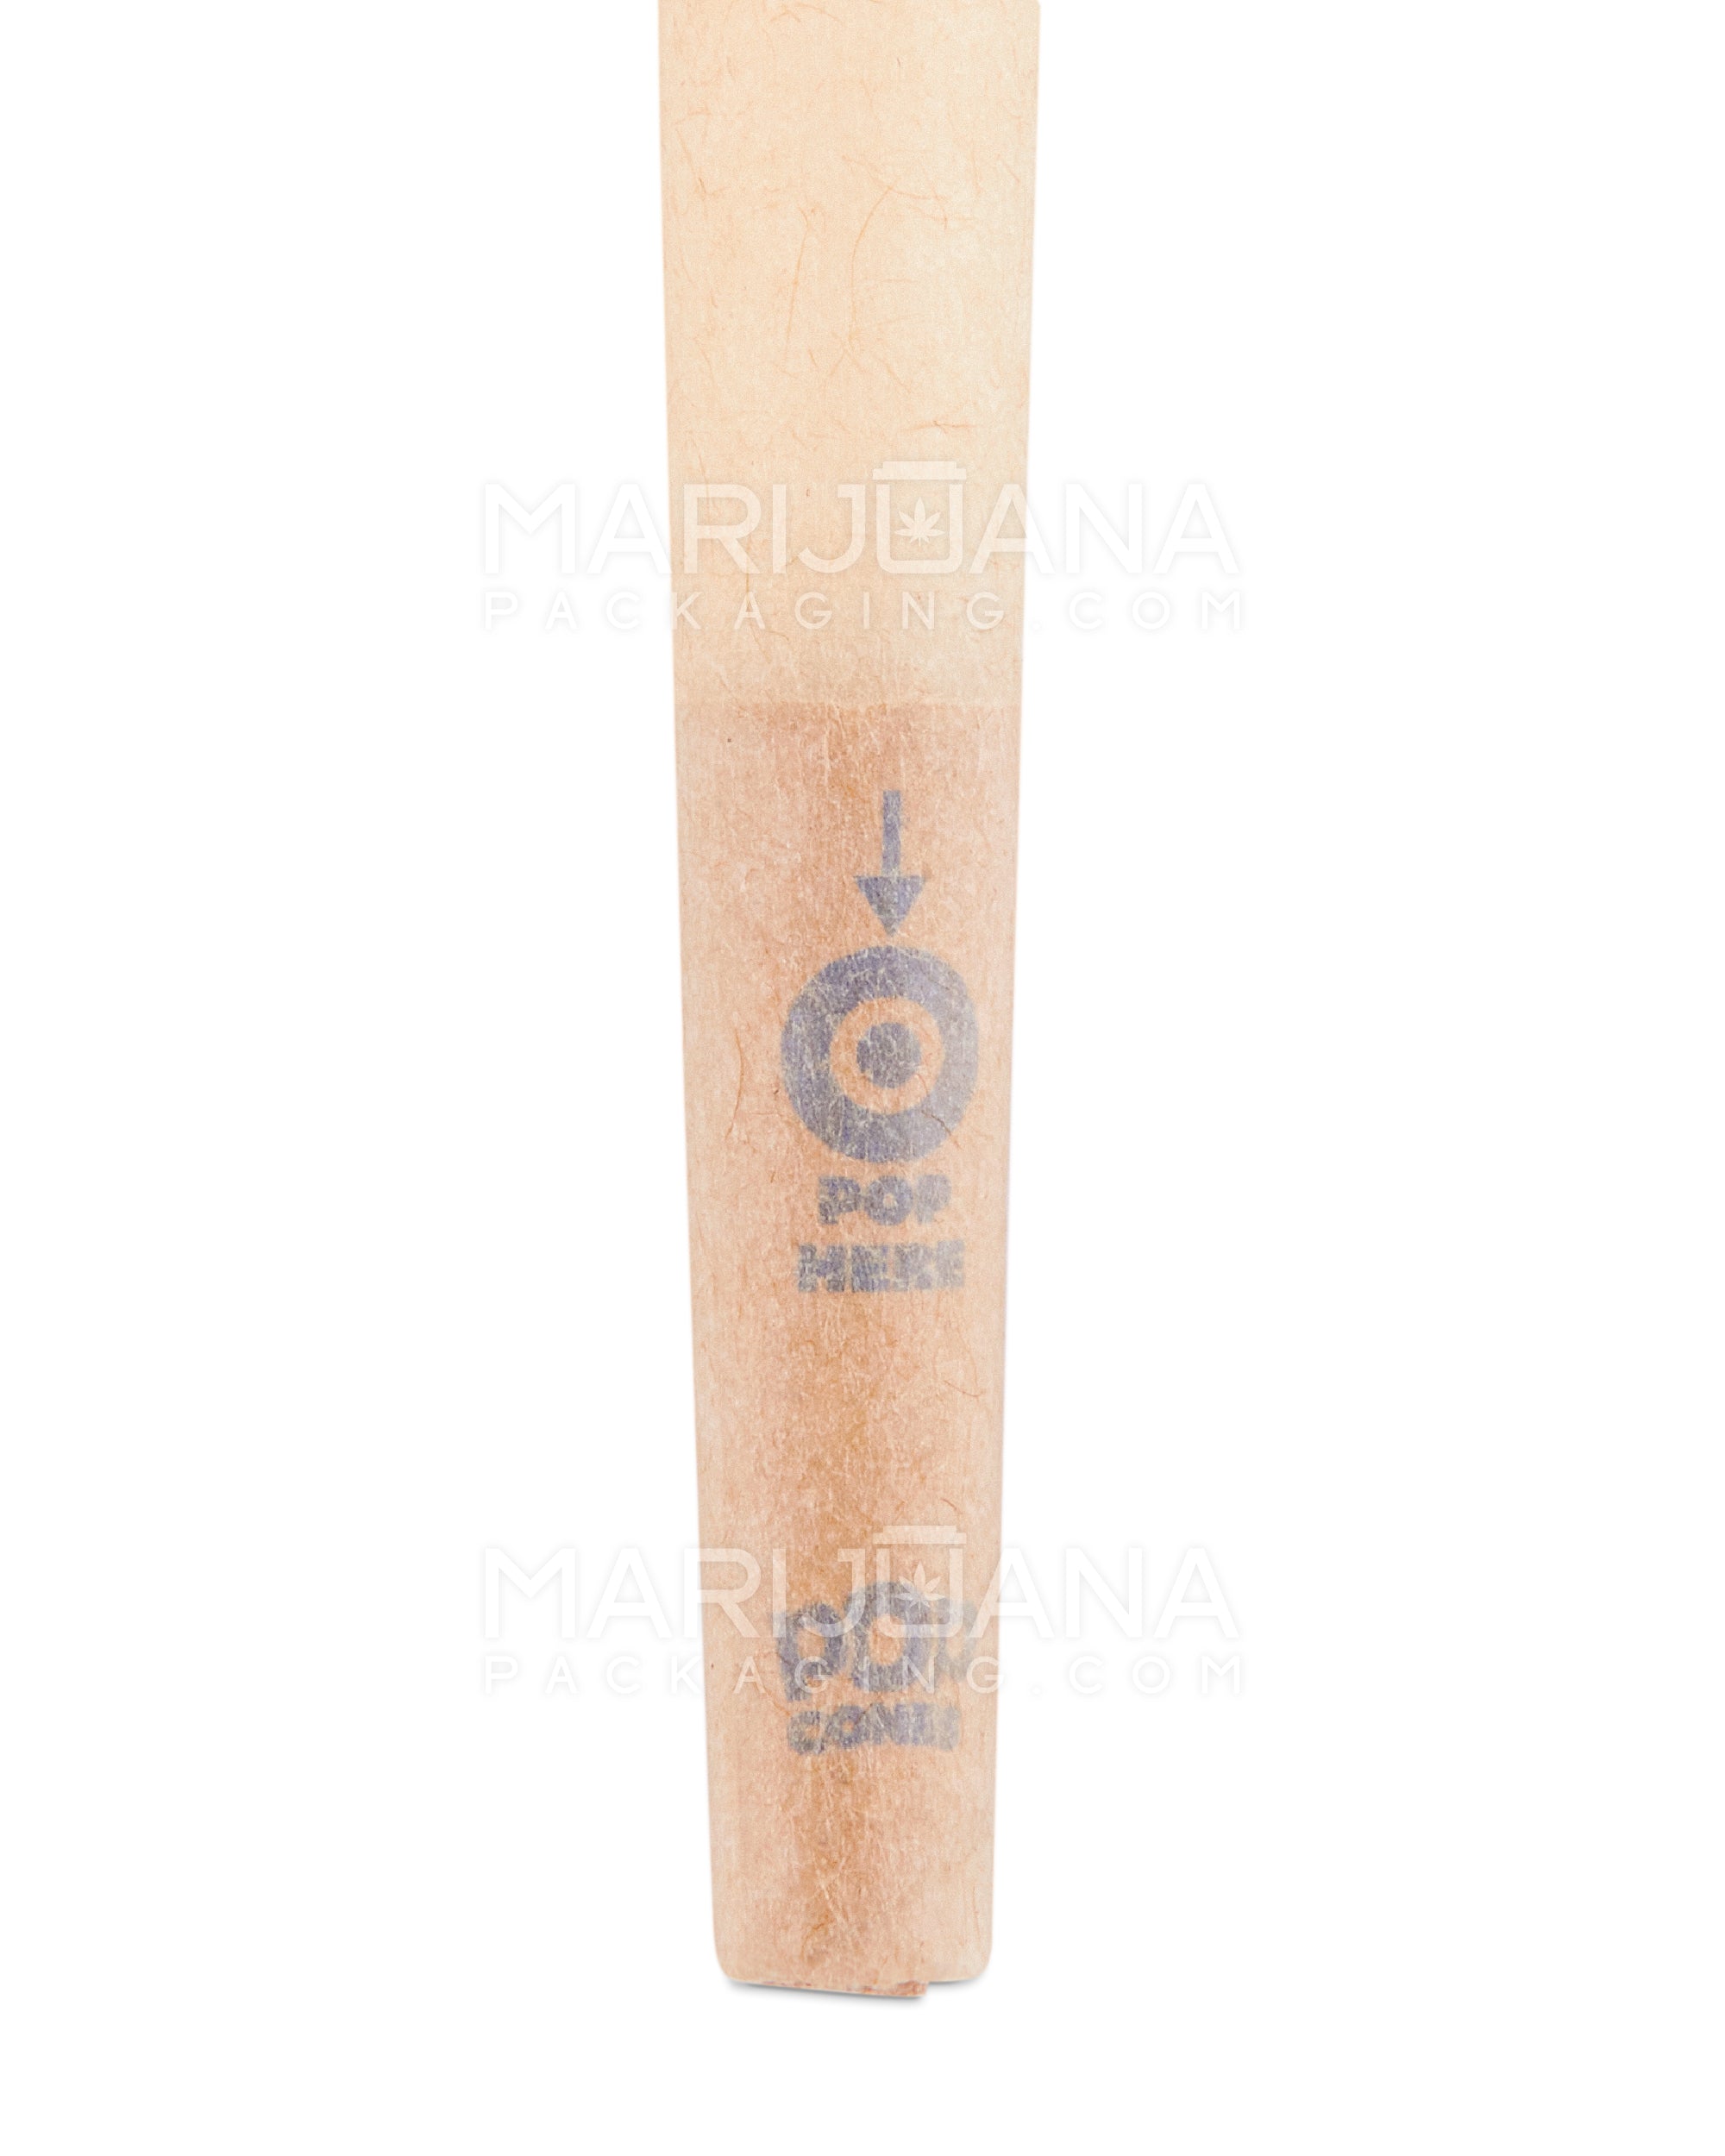 POP CONES | 1 1/4 Size Unbleached Pre-Rolled Cones | 84mm - Banana Cream - 400 Count - 5